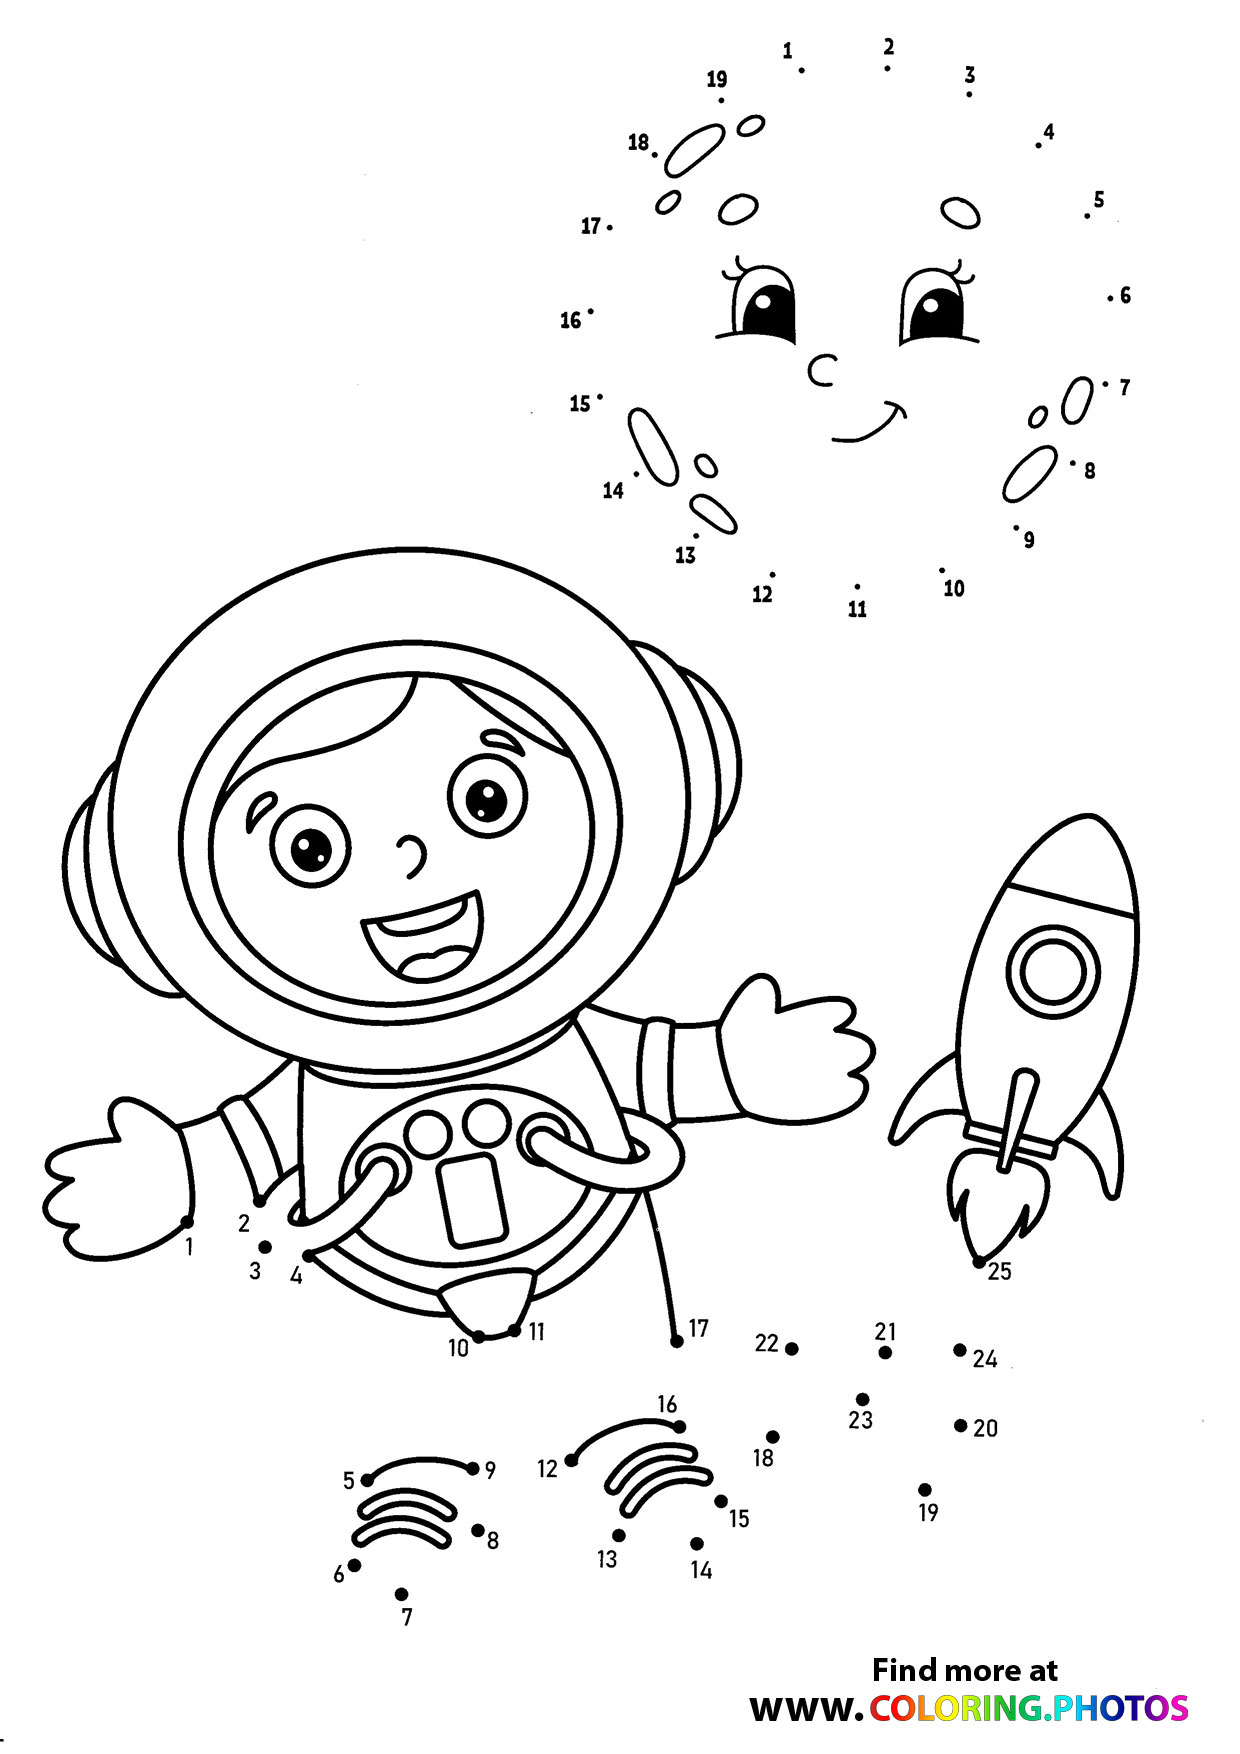 dot-to-dots-worksheets-for-kids-free-print-connect-and-color